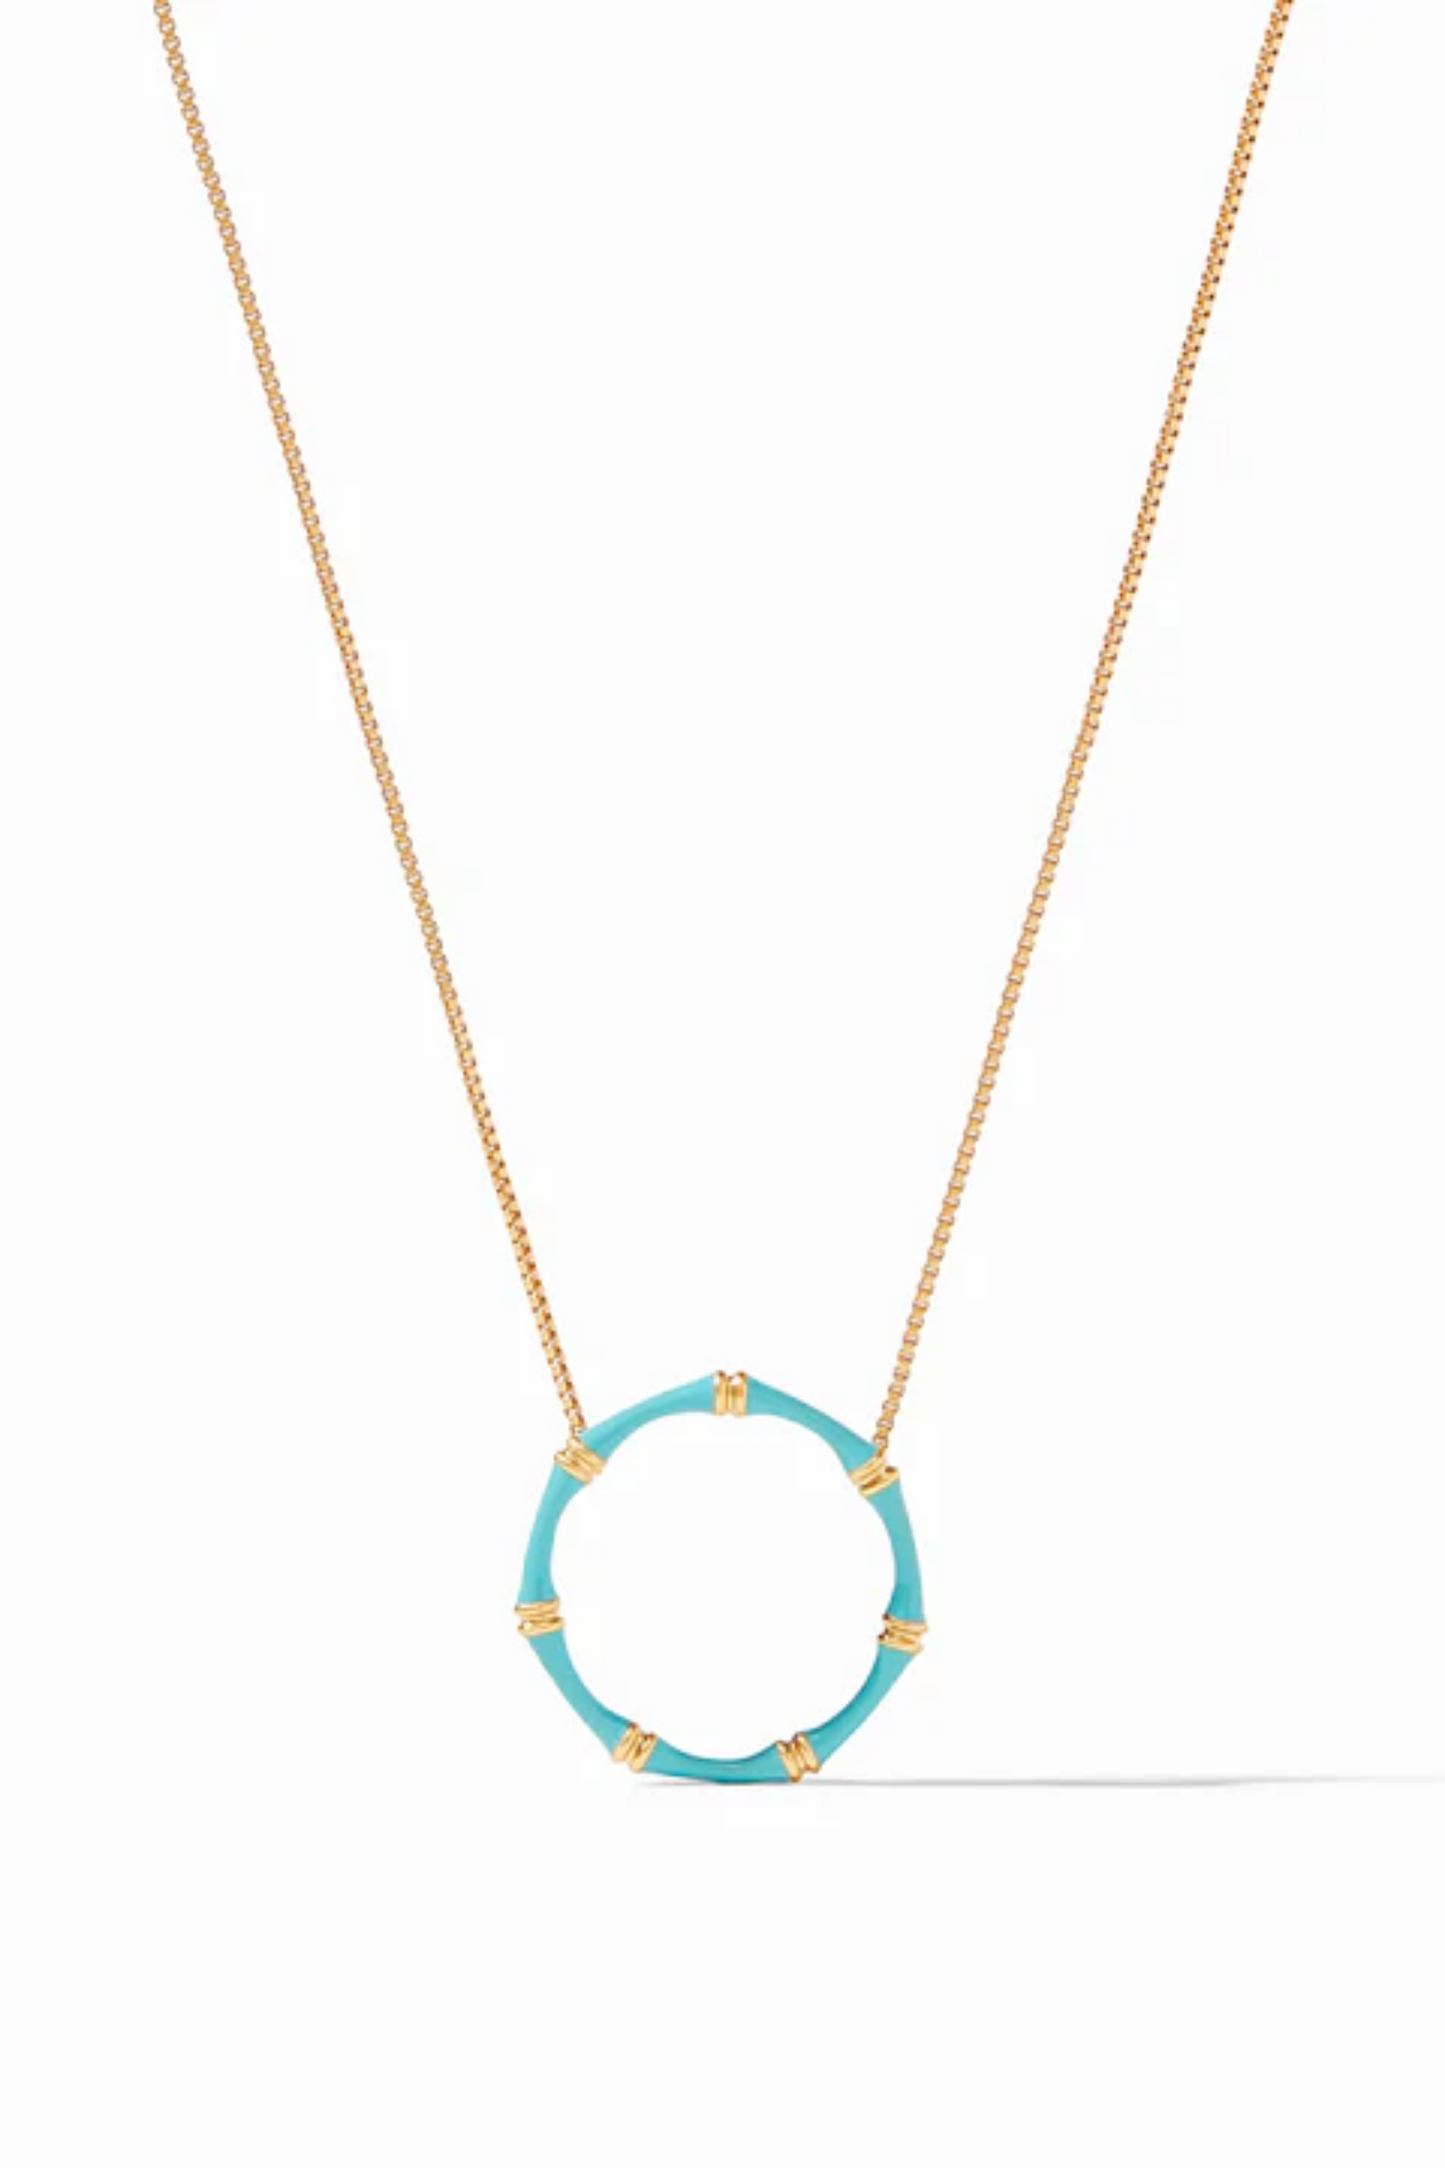 Bamboo Delicate Necklace - Bahamian Blue